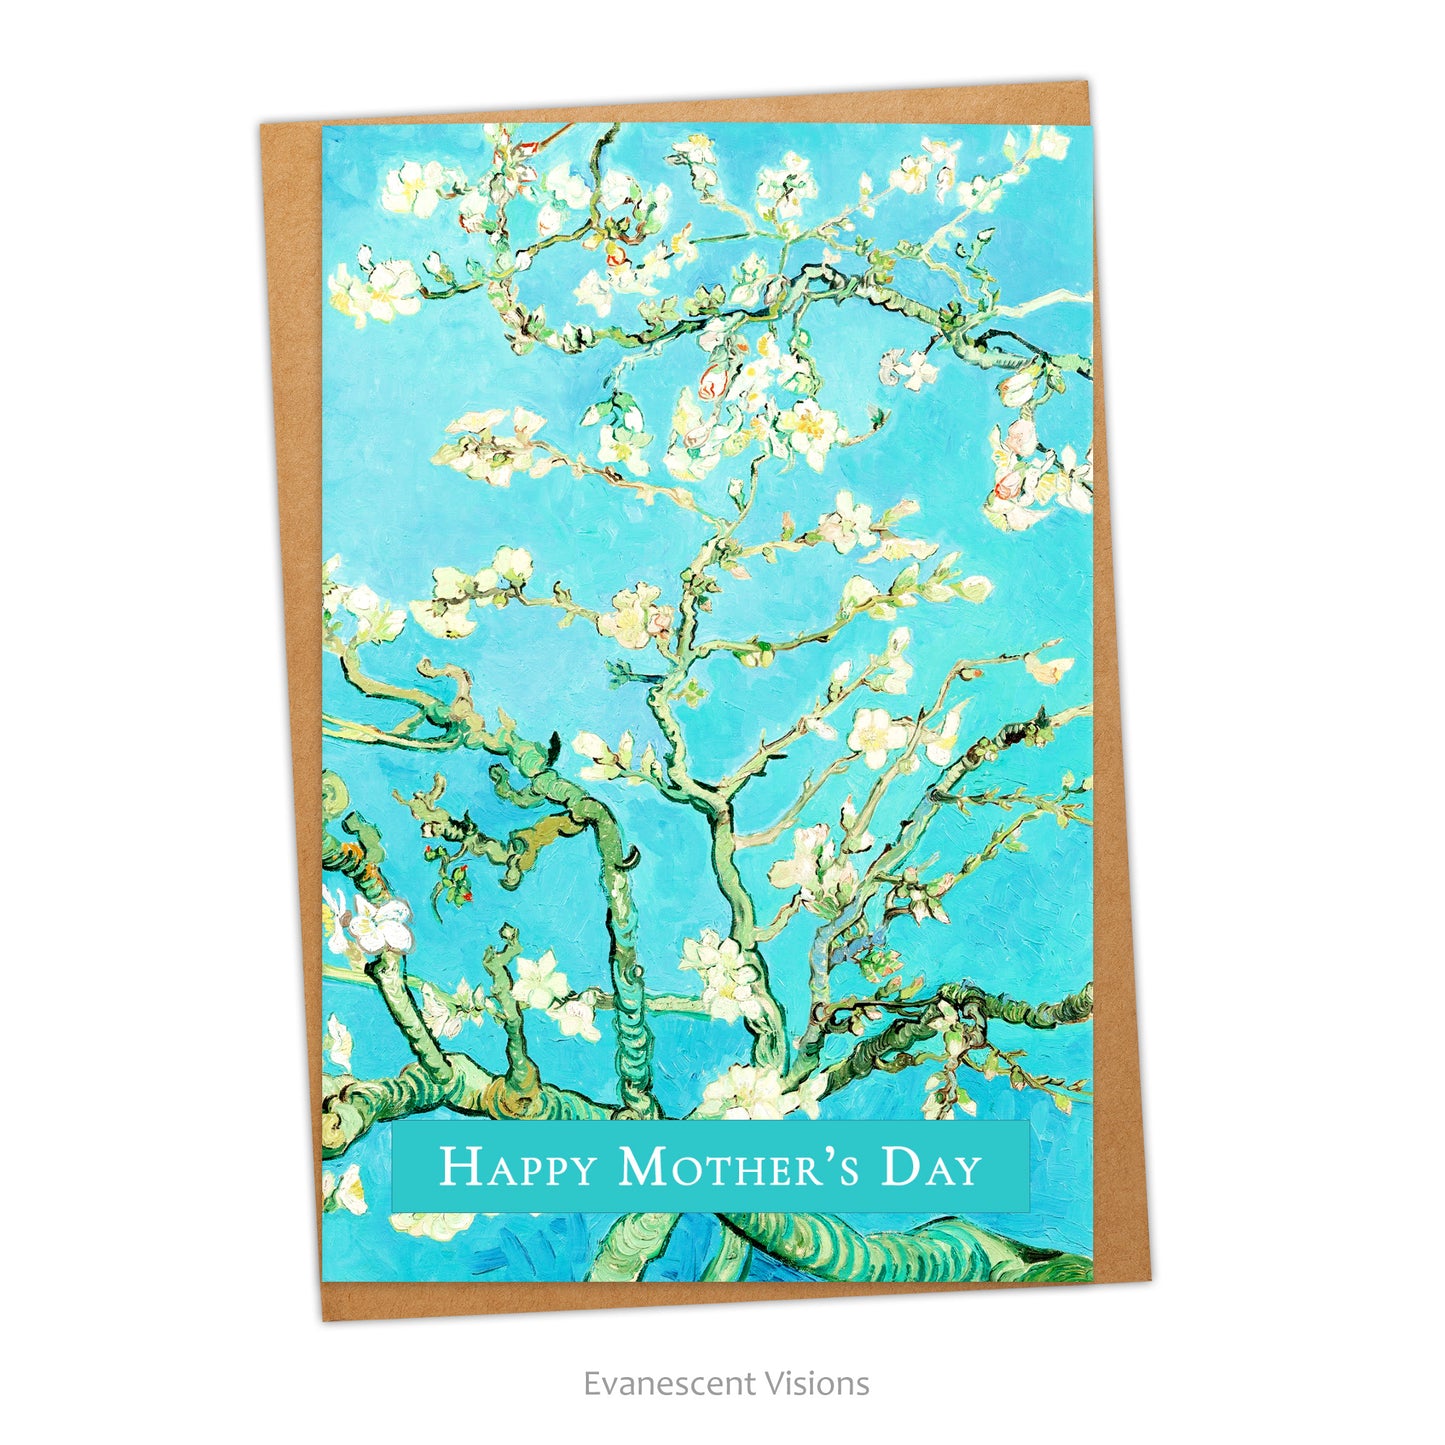 Card and Envelope. Card's image is Van Gogh's 'Almond Blossom' with a banner at the bottom with the words 'Happy Mother's Day.'